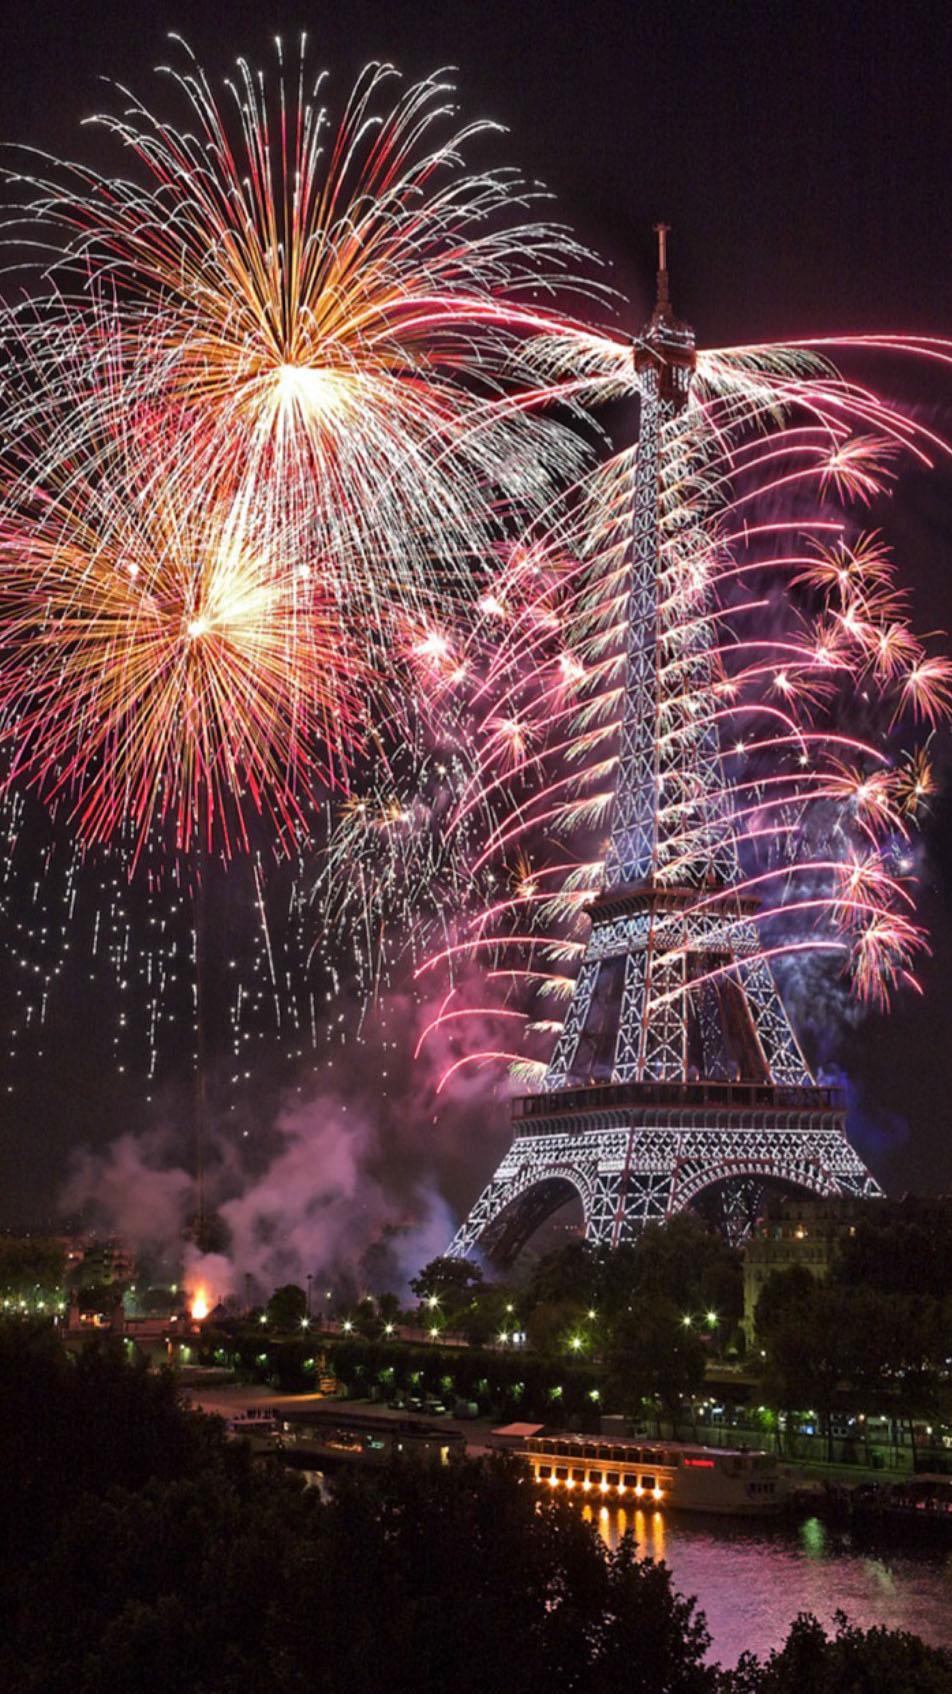 2019 Fireworks Eiffel Tower Live Wallpaper Free for Android - APK Download